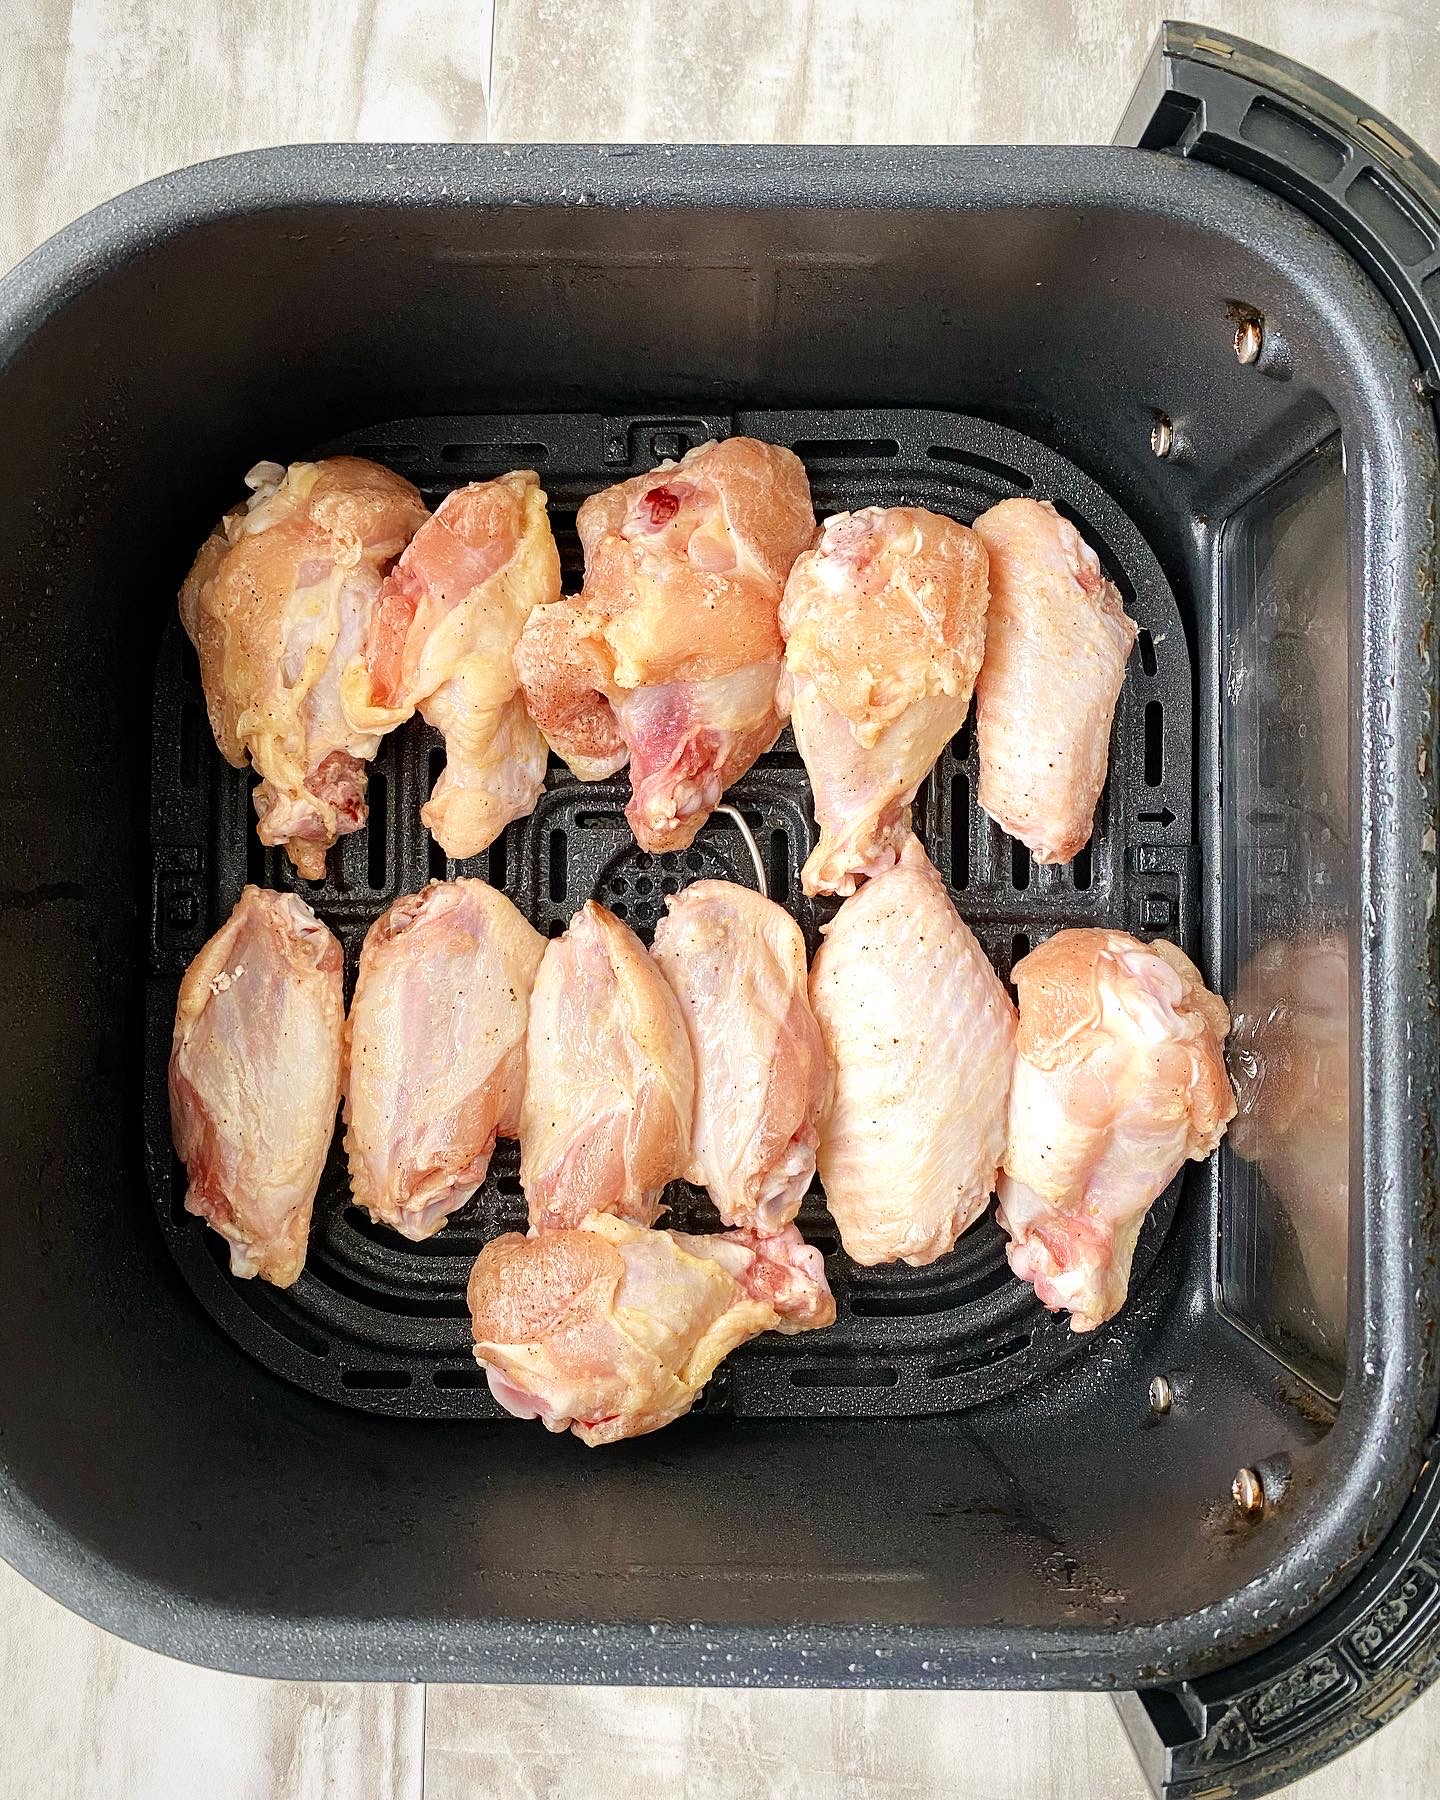 uncooked chicken wings in the air fryer basket